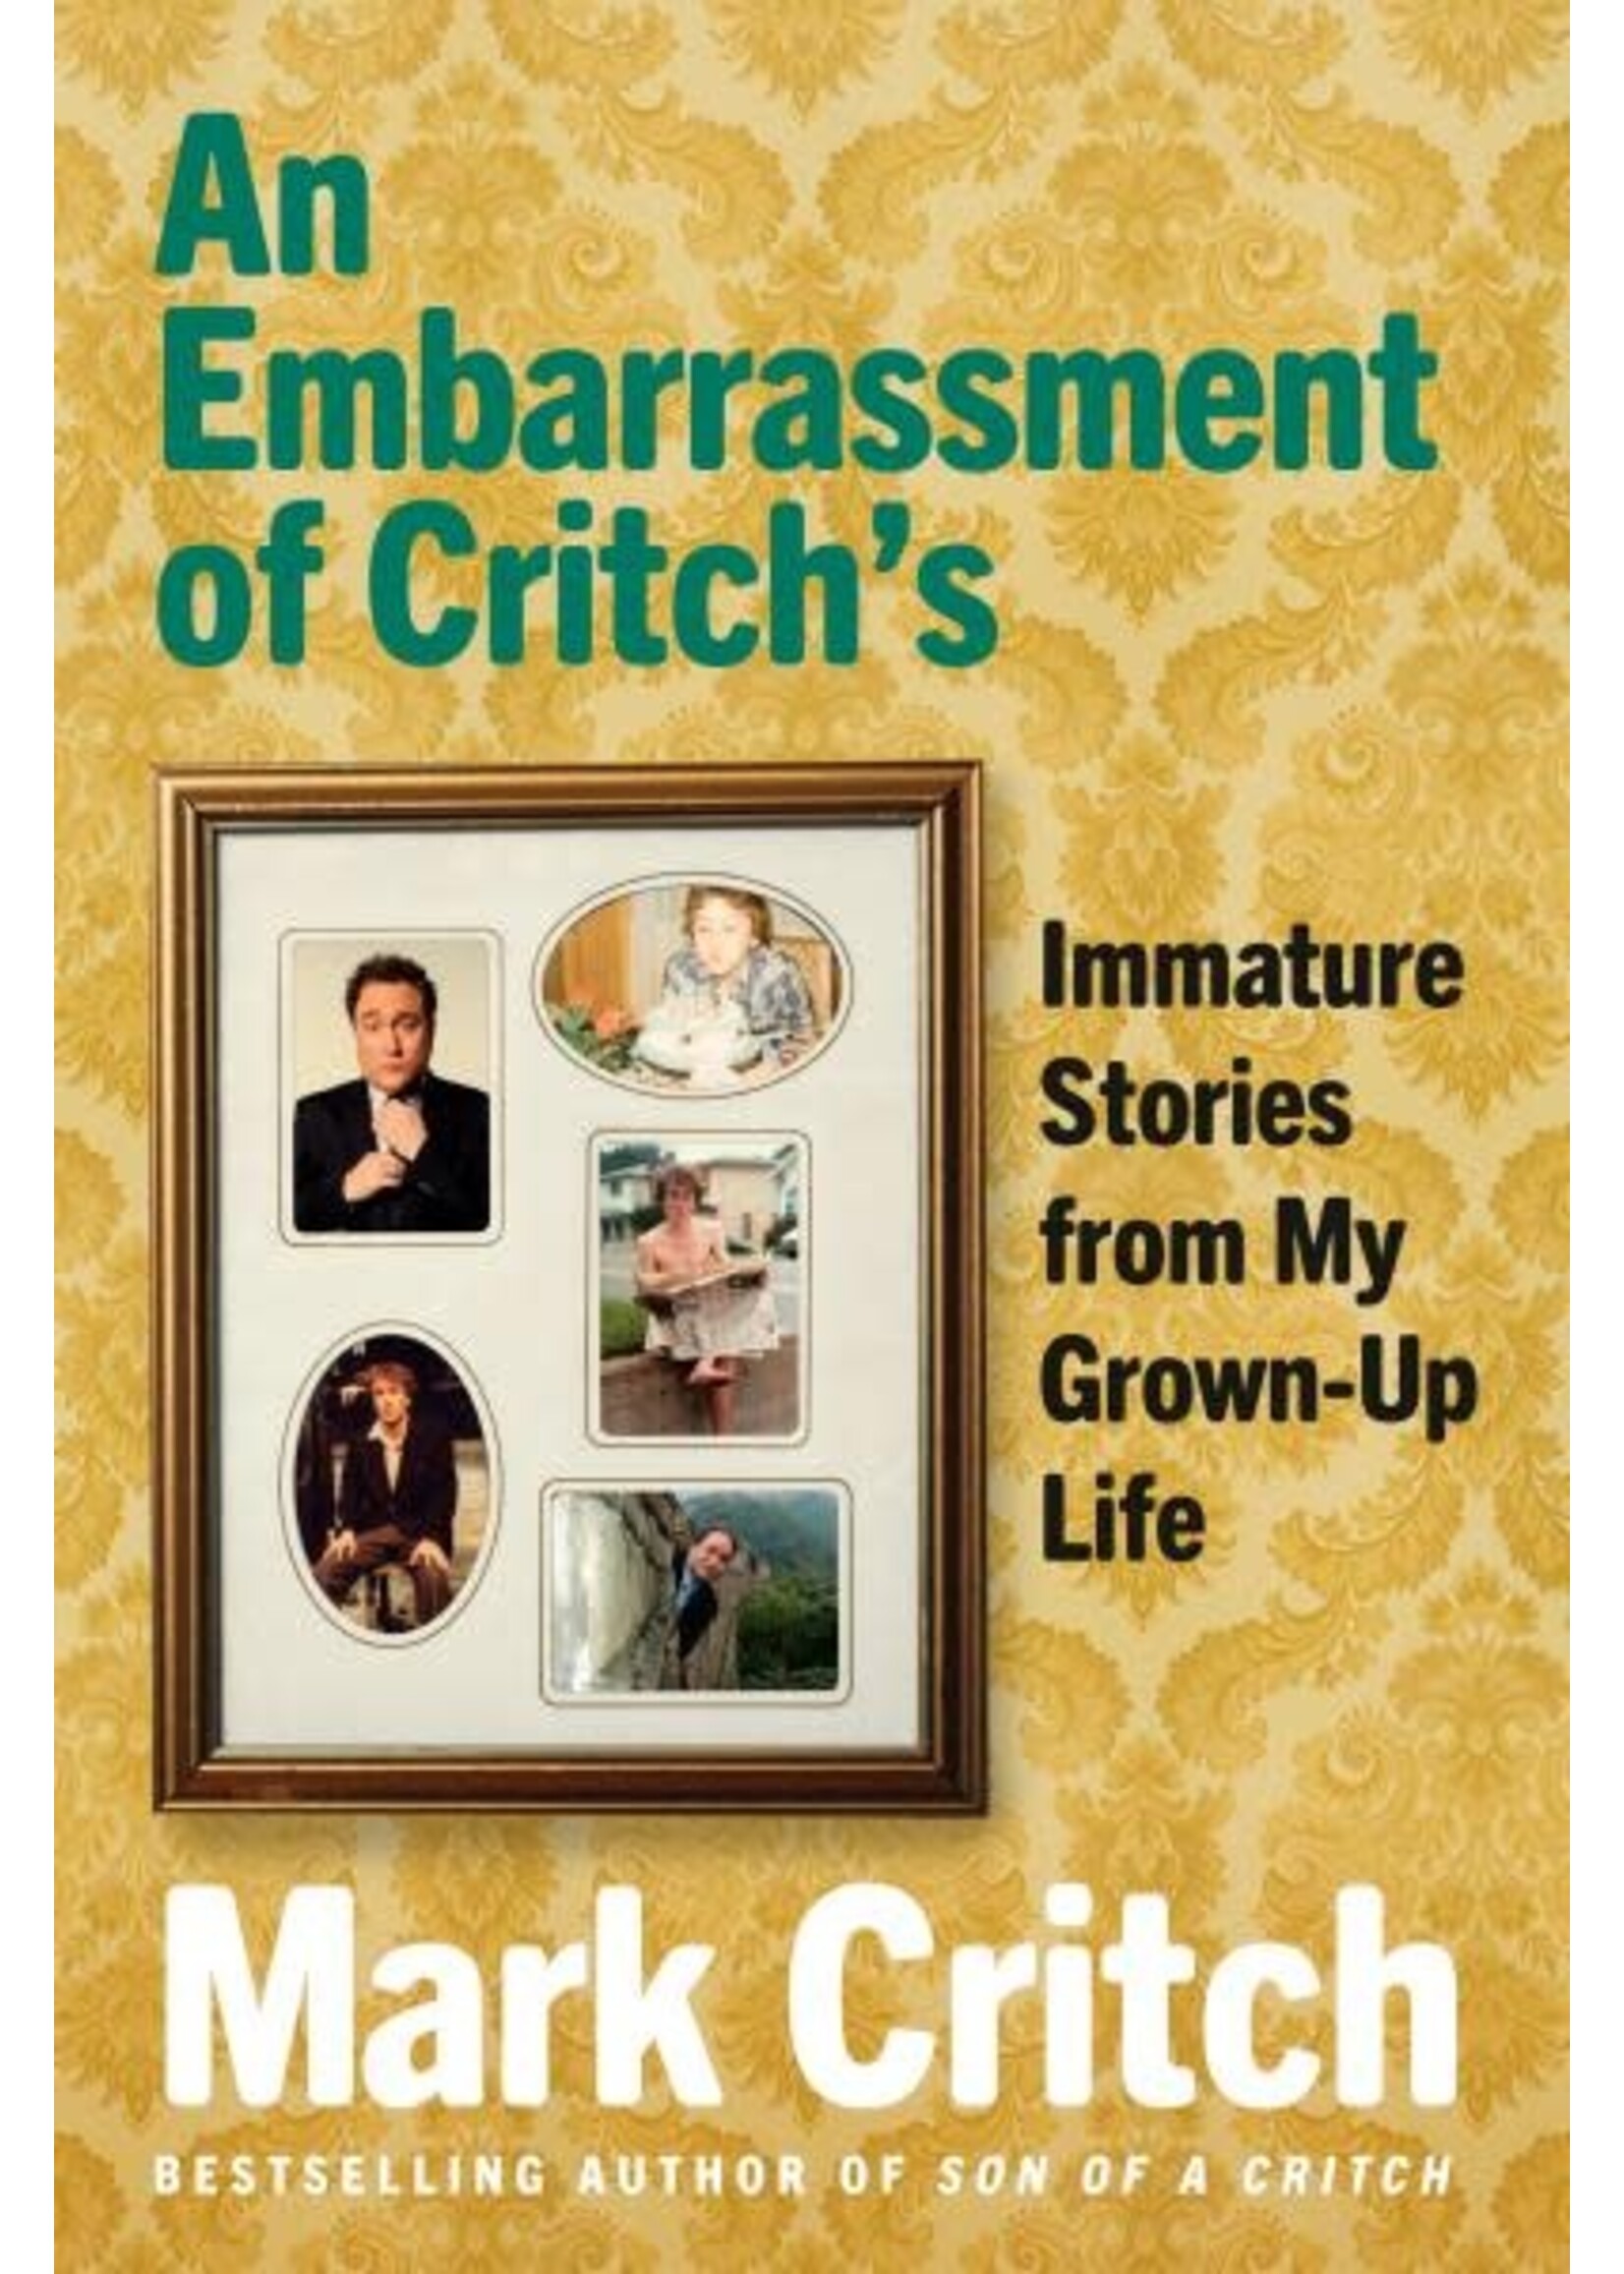 An Embarrassment of Critch's: Immature Stories from My Grown-Up Life by Mark Critch